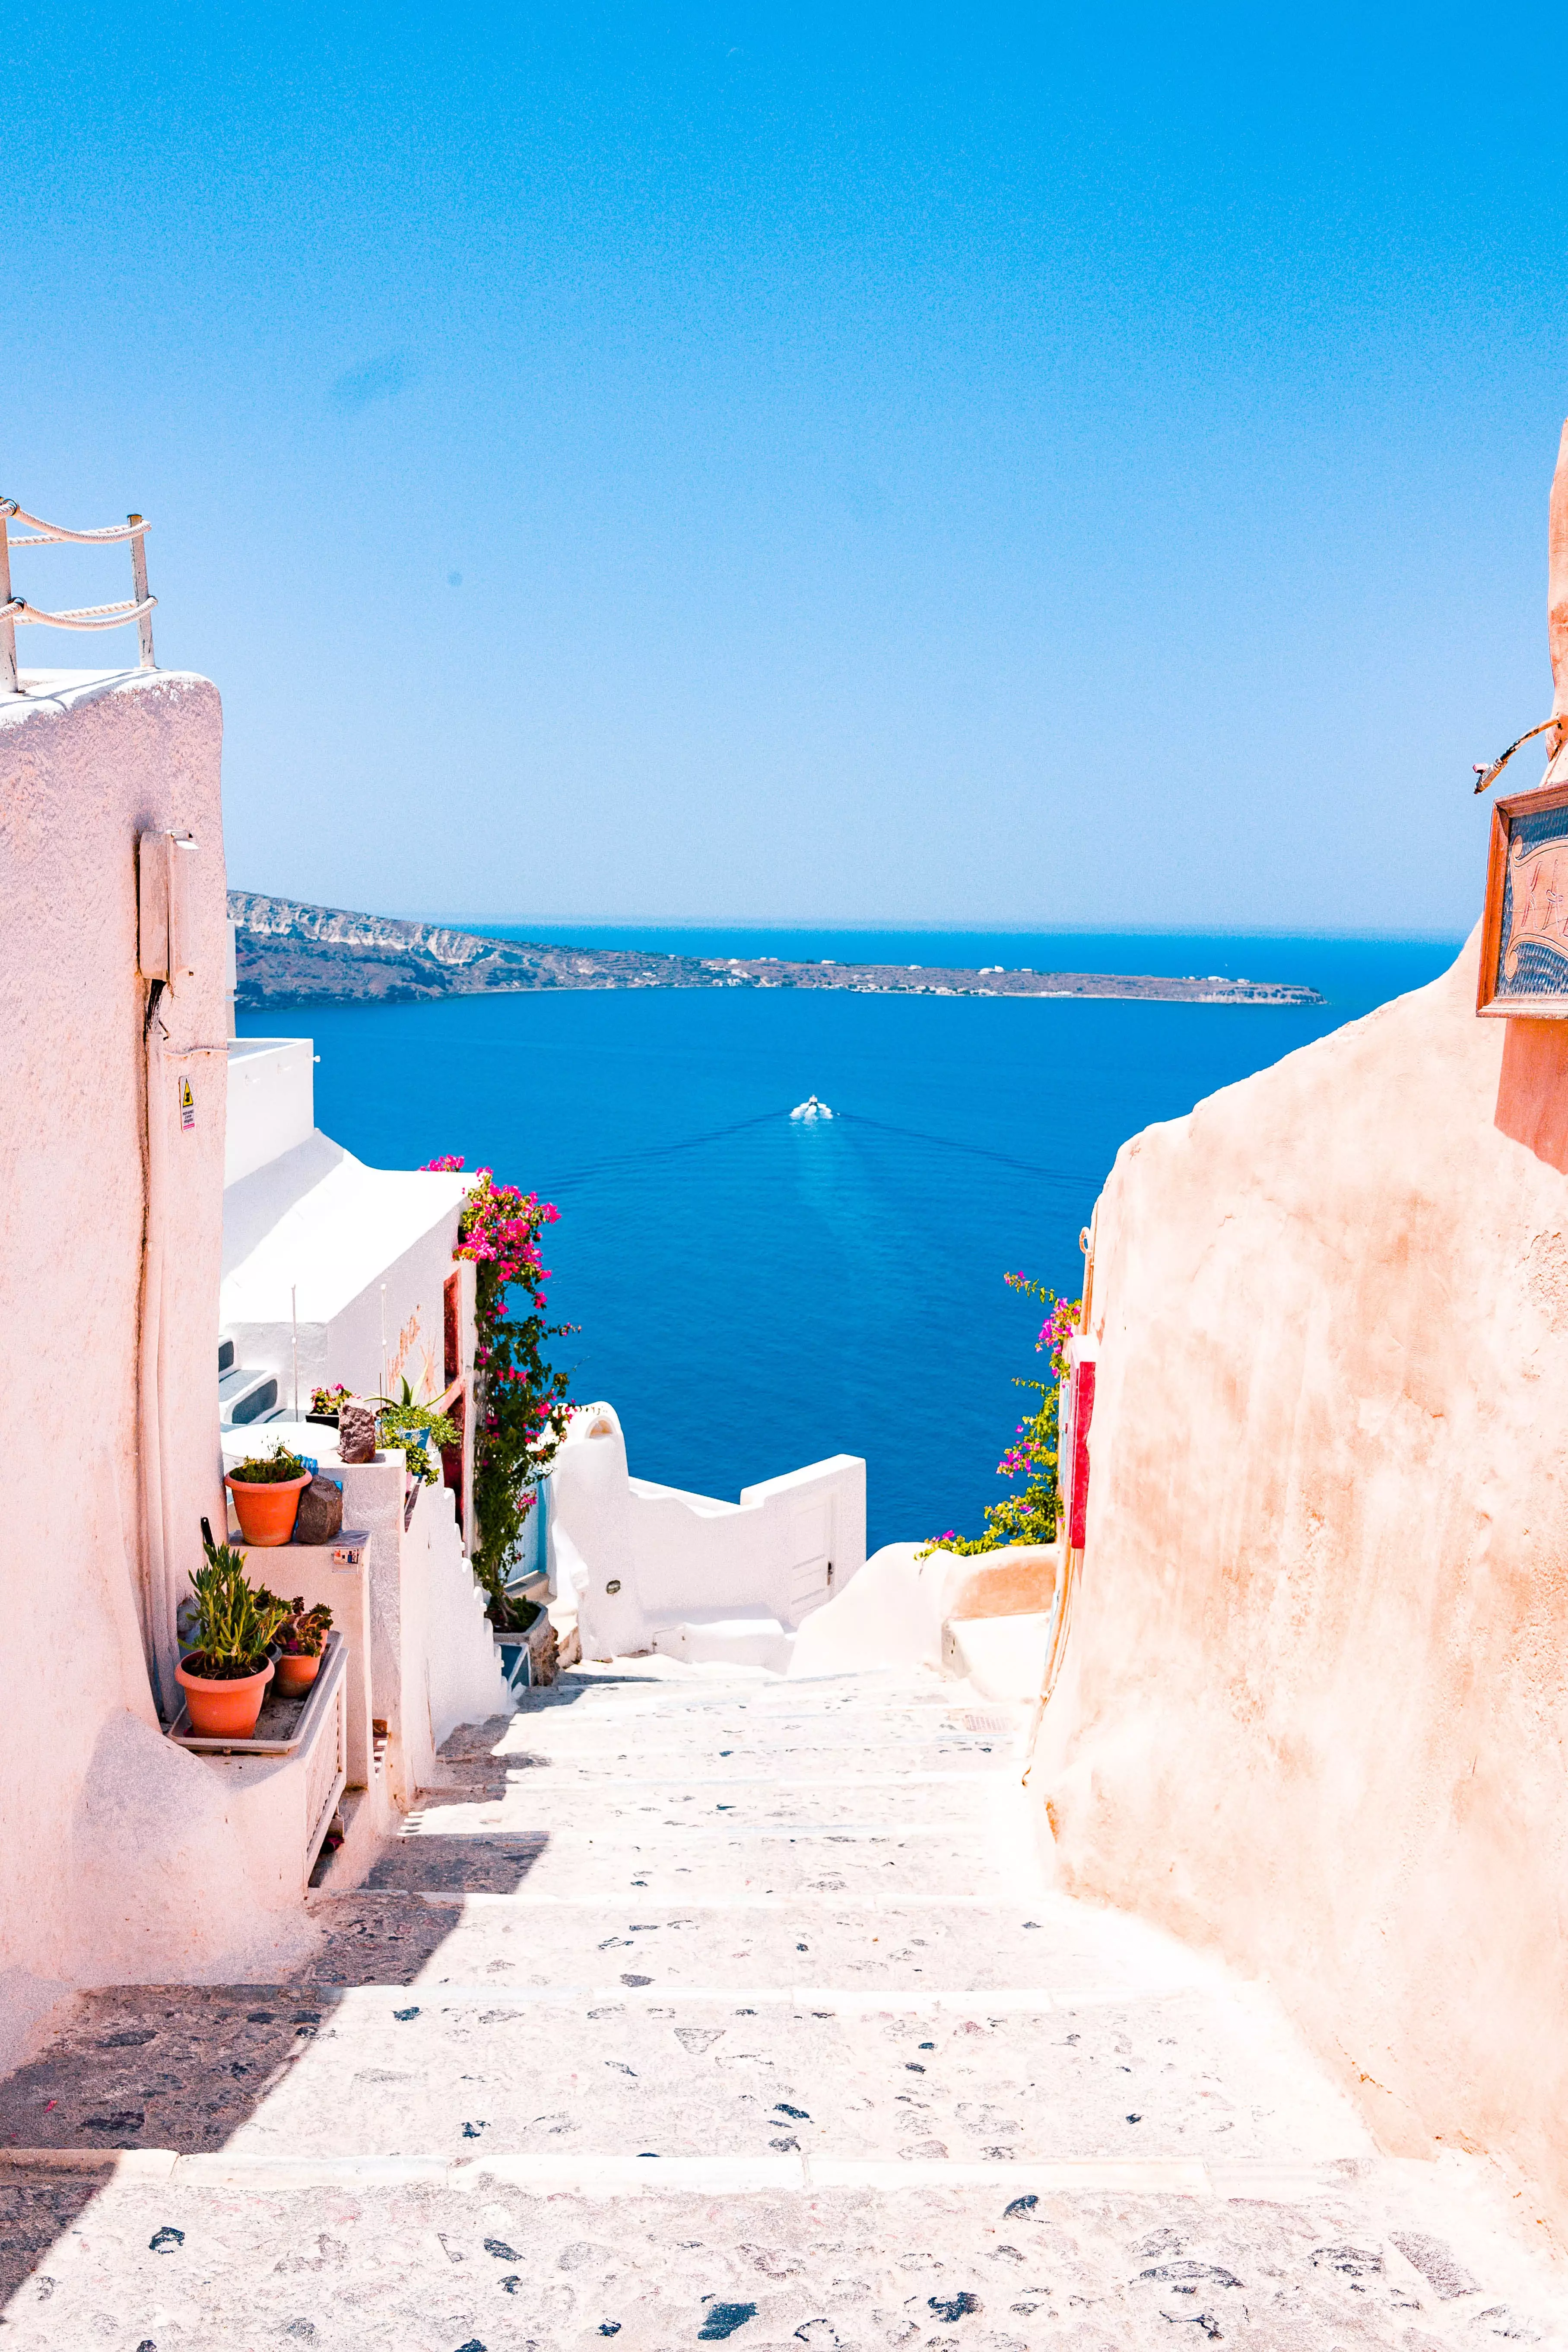 Hotels in Greece have slashed their prices (